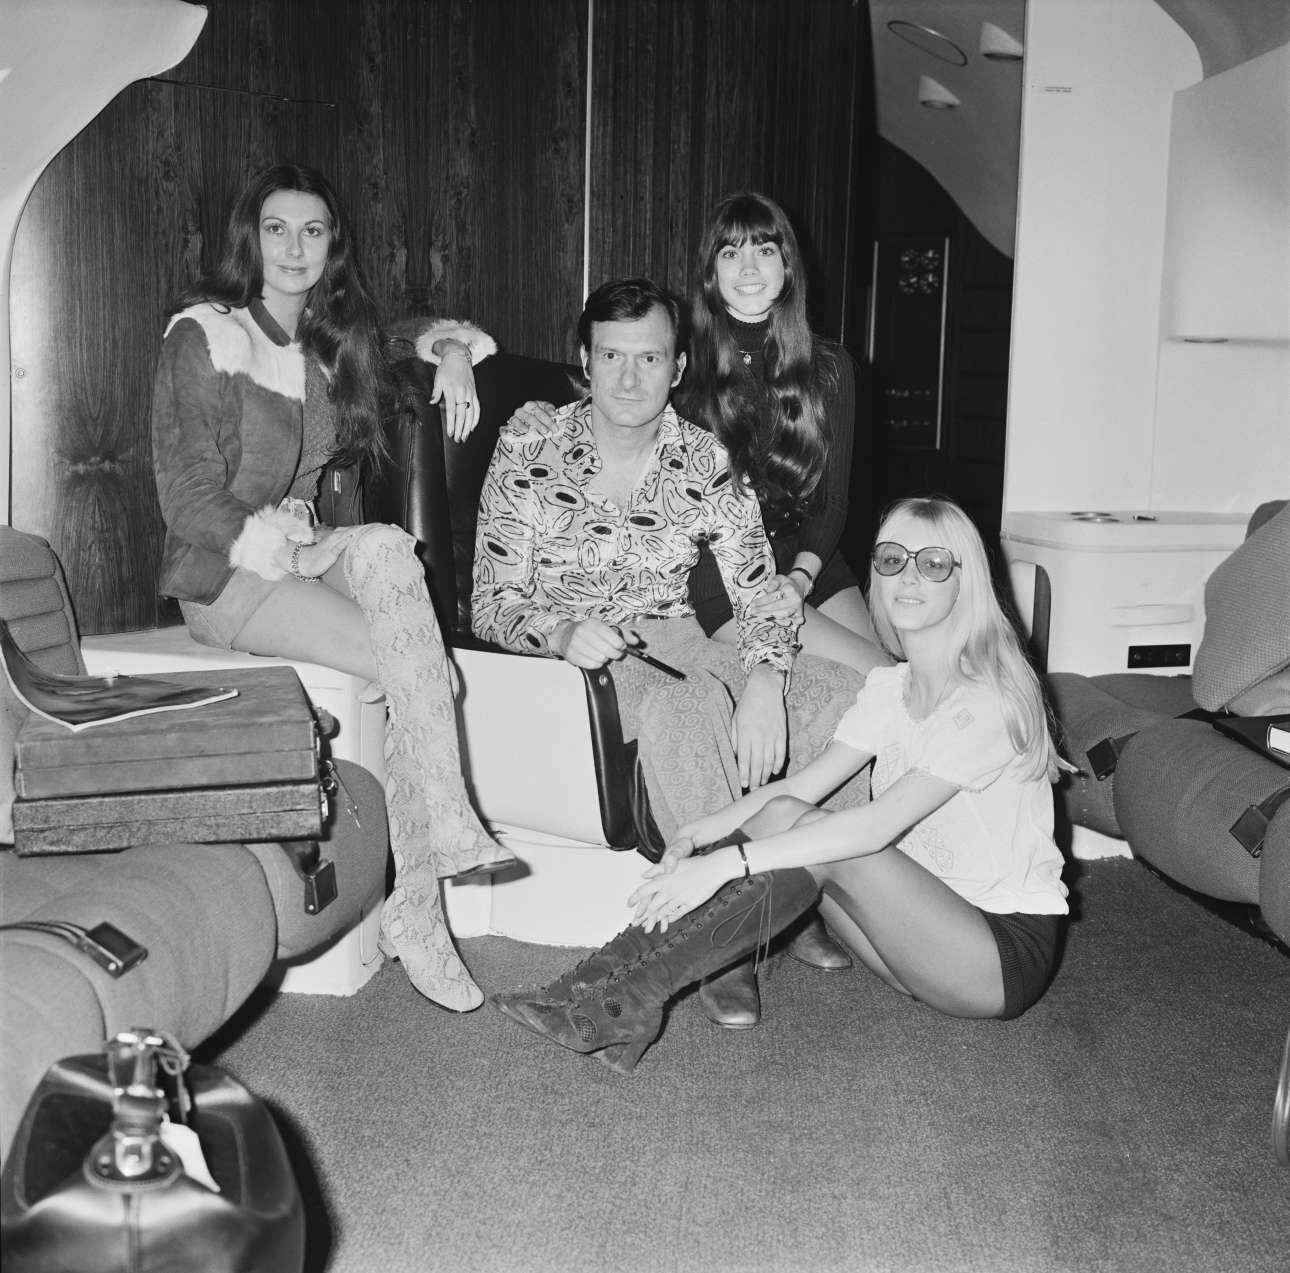 Hefner in his aircraft in London, before flying back to Chicago, 20th February 1971. With him are Playboy models (left to right) Marilyn Cole, Barbi Benton and Connie Kreski.